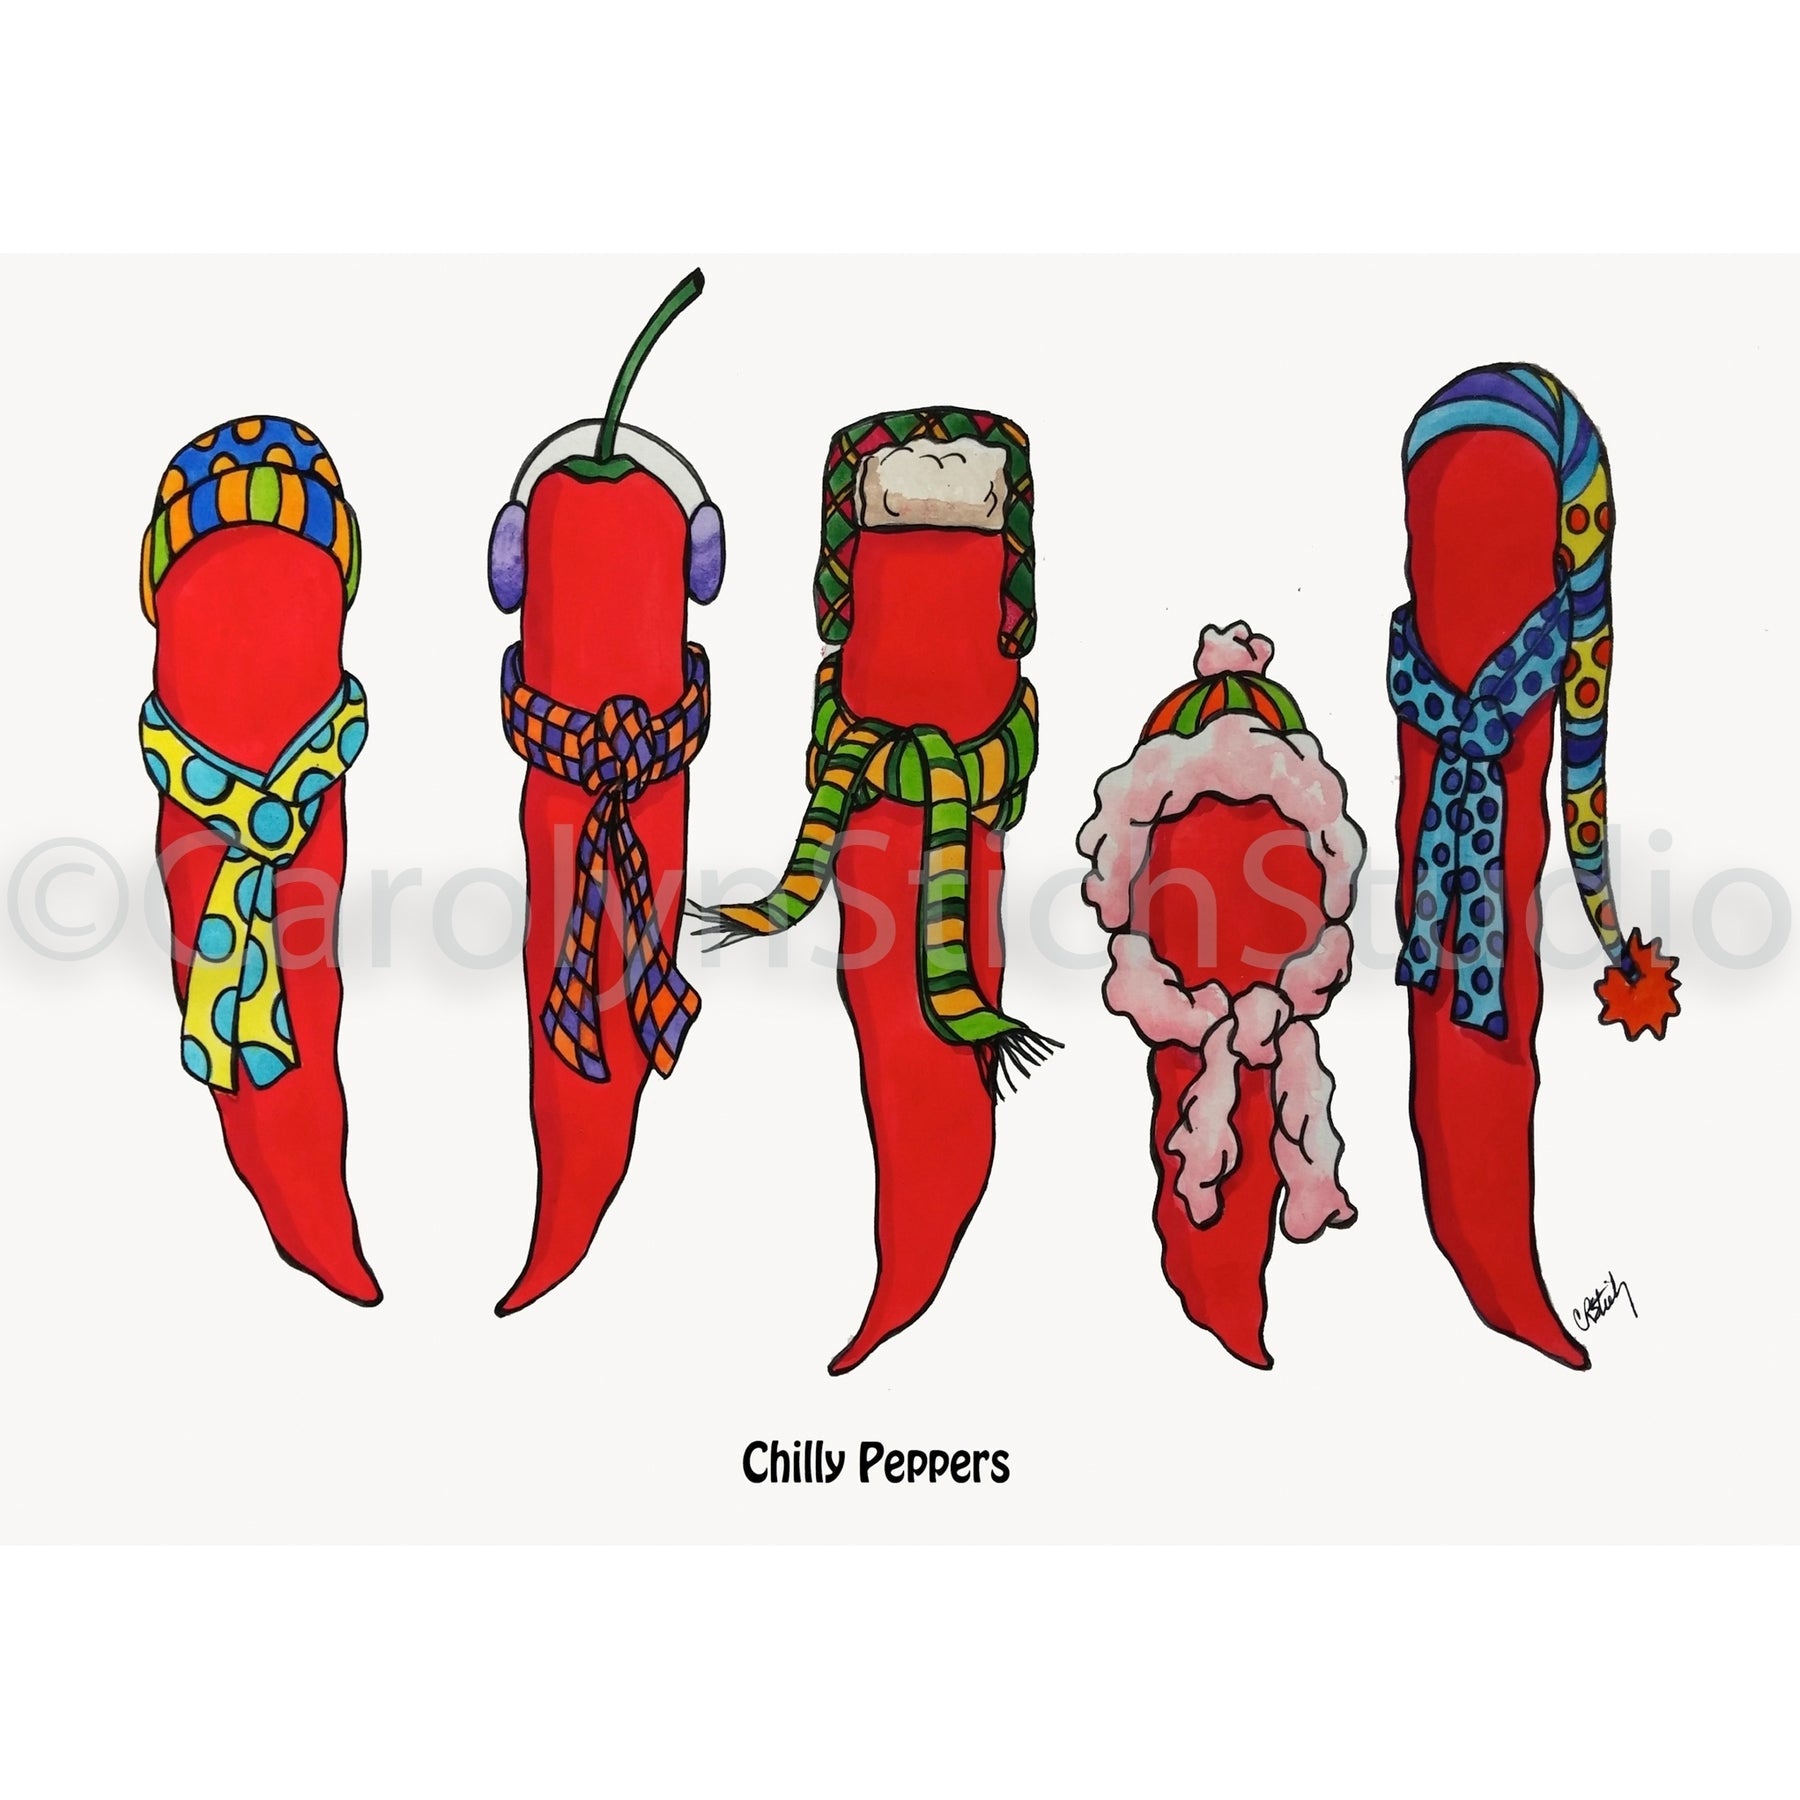 Chilly Peppers, rug hooking pattern